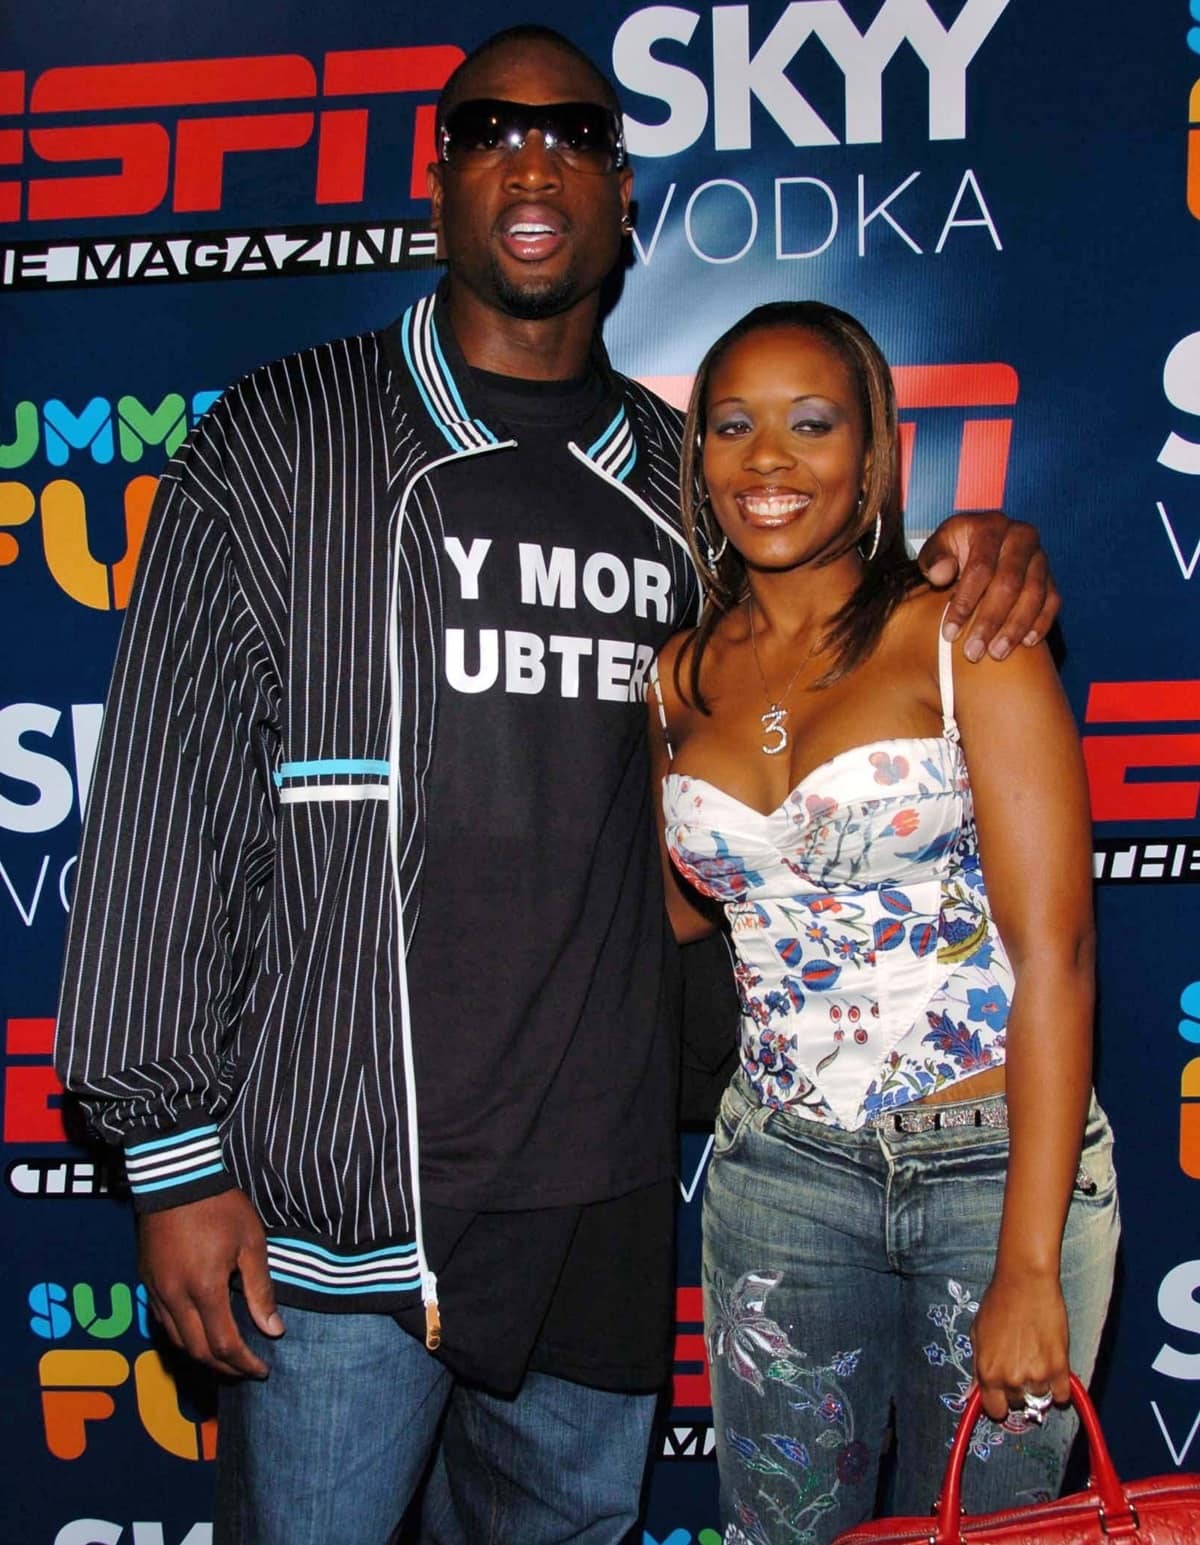 Dwyane Wade's first relationship started when he was nine years old with Siohvaughn Funches-Wade, who later became his high school girlfriend and first wife